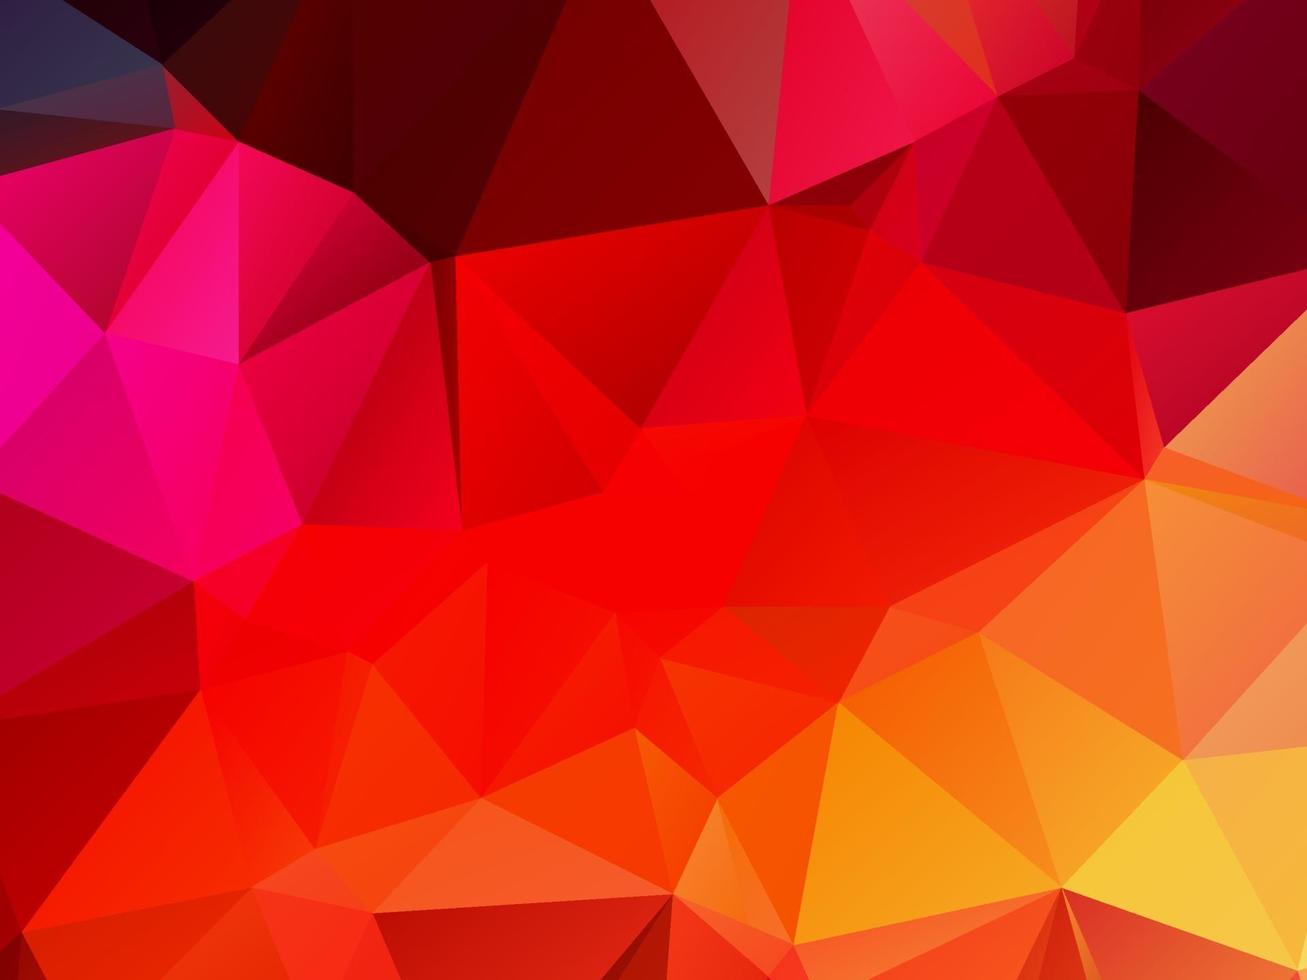 Decorative geometric triangle polygon abstract background vector